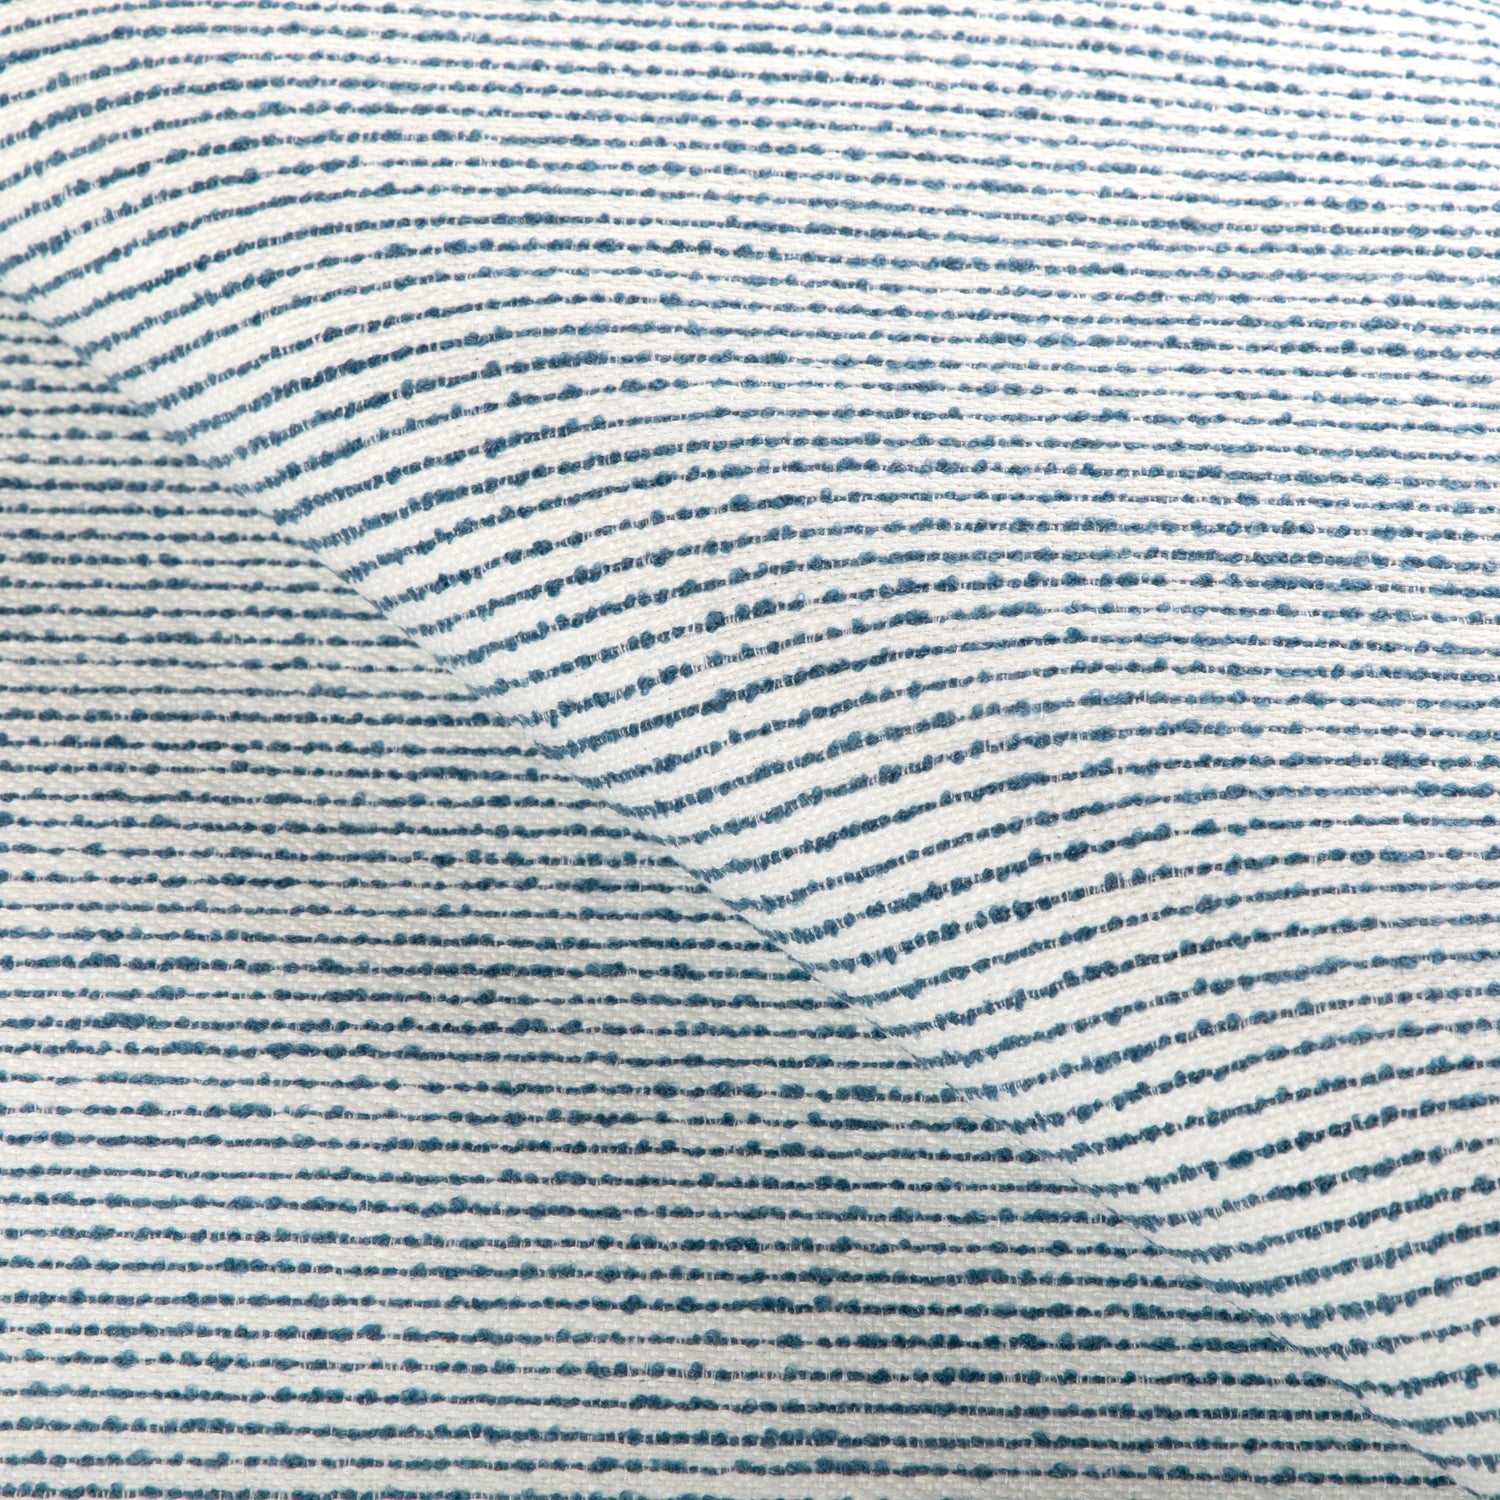 Fabric sample of Tropez Stripe fabric in sky color - pattern 36927.51.0 - by Kravet Couture in the Riviera collection